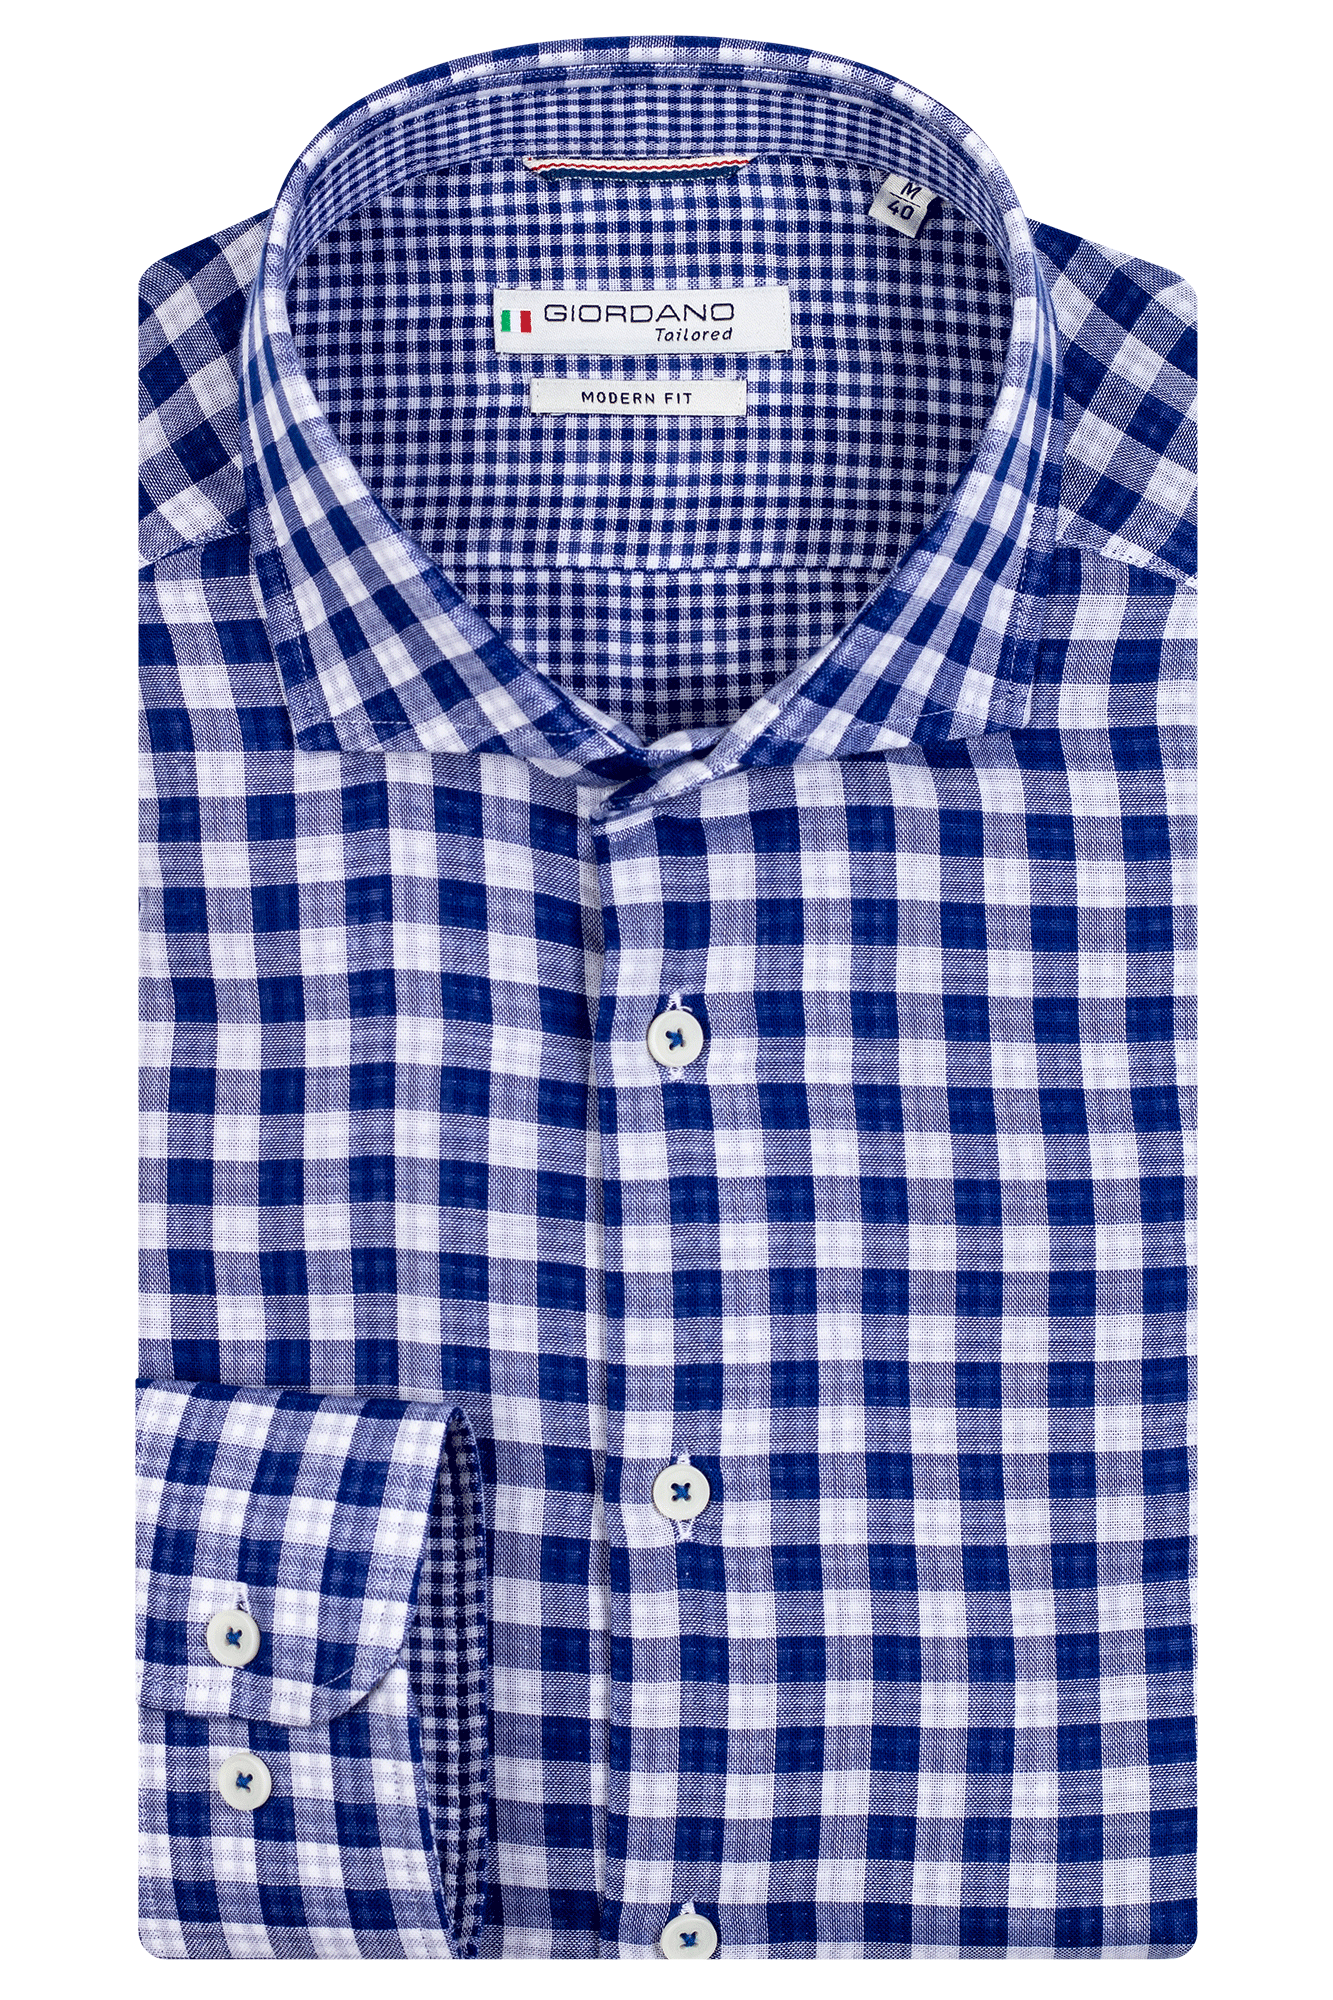 Large check in Darker Blue by Giordano